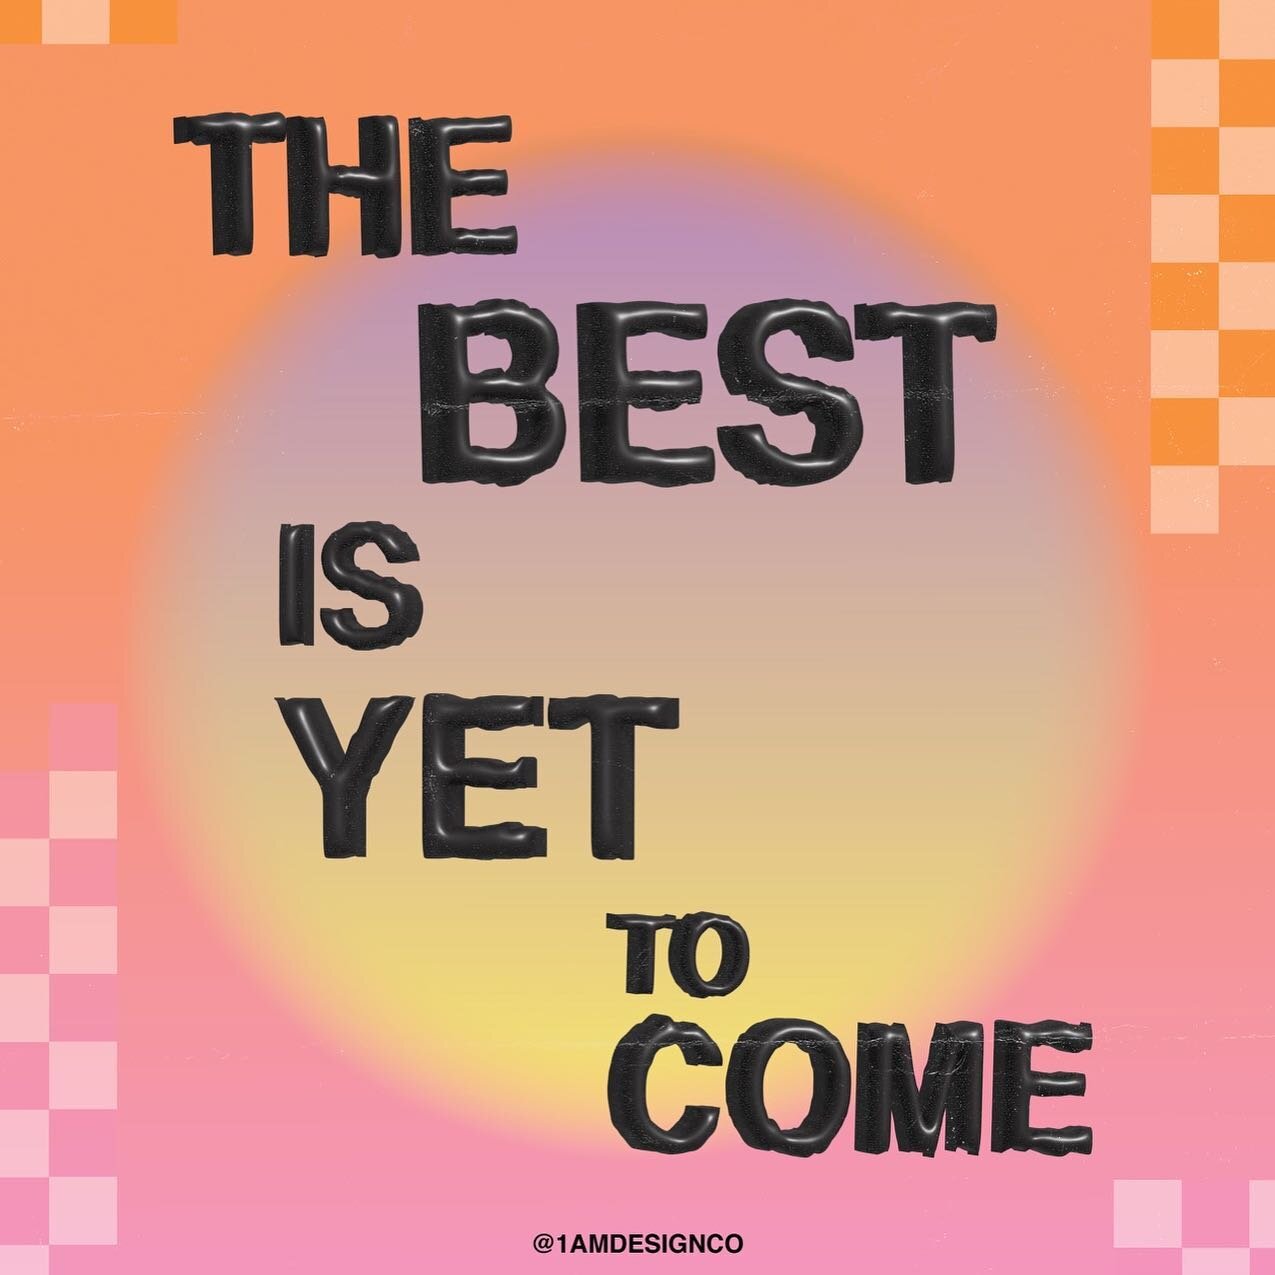 The best is yet to come.
-
-

#smallbusiness #graphic #design #atlanta #graphicart